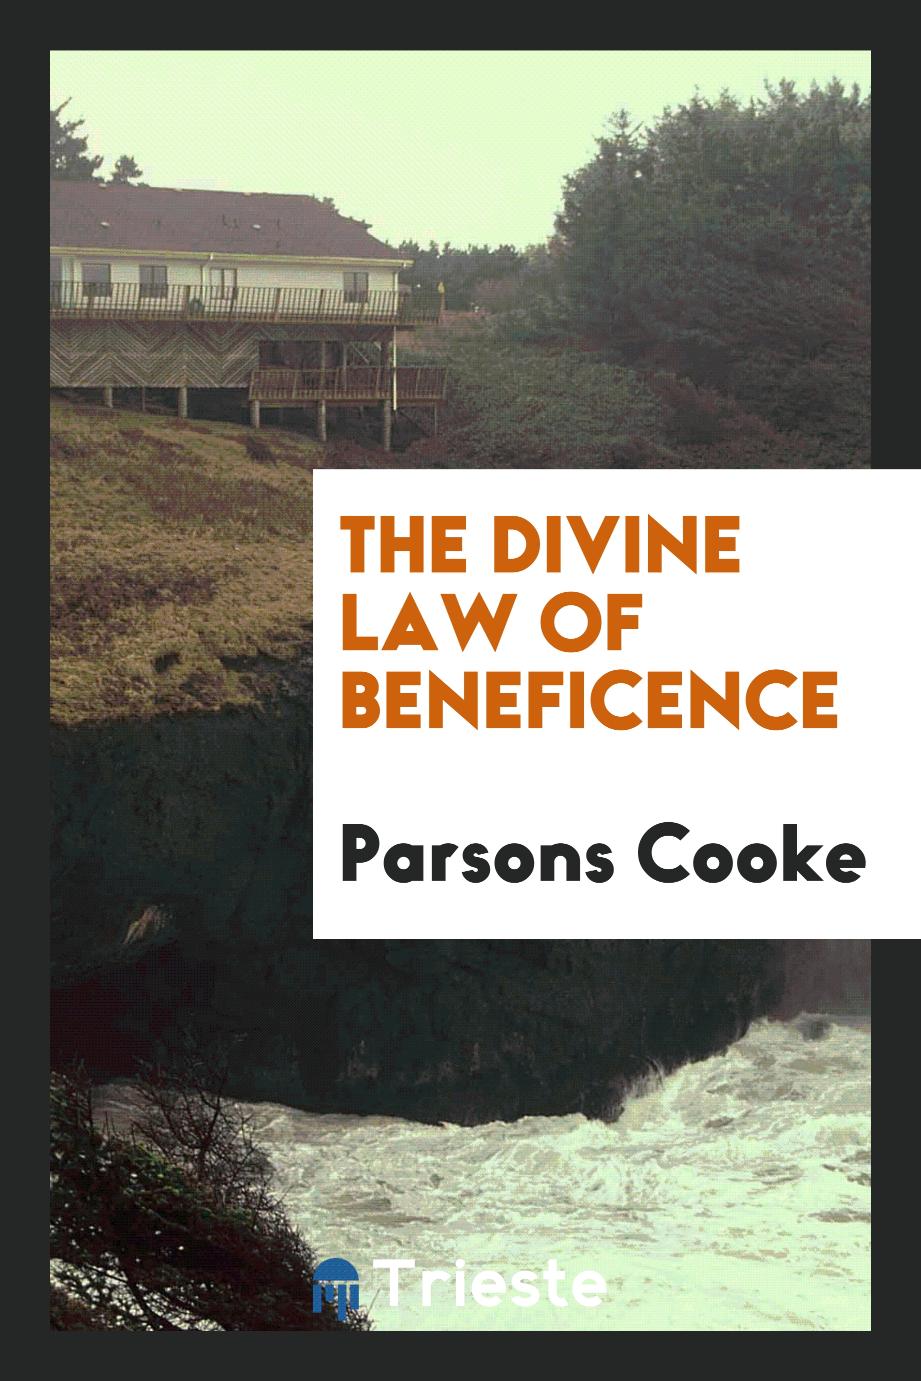 The divine law of beneficence